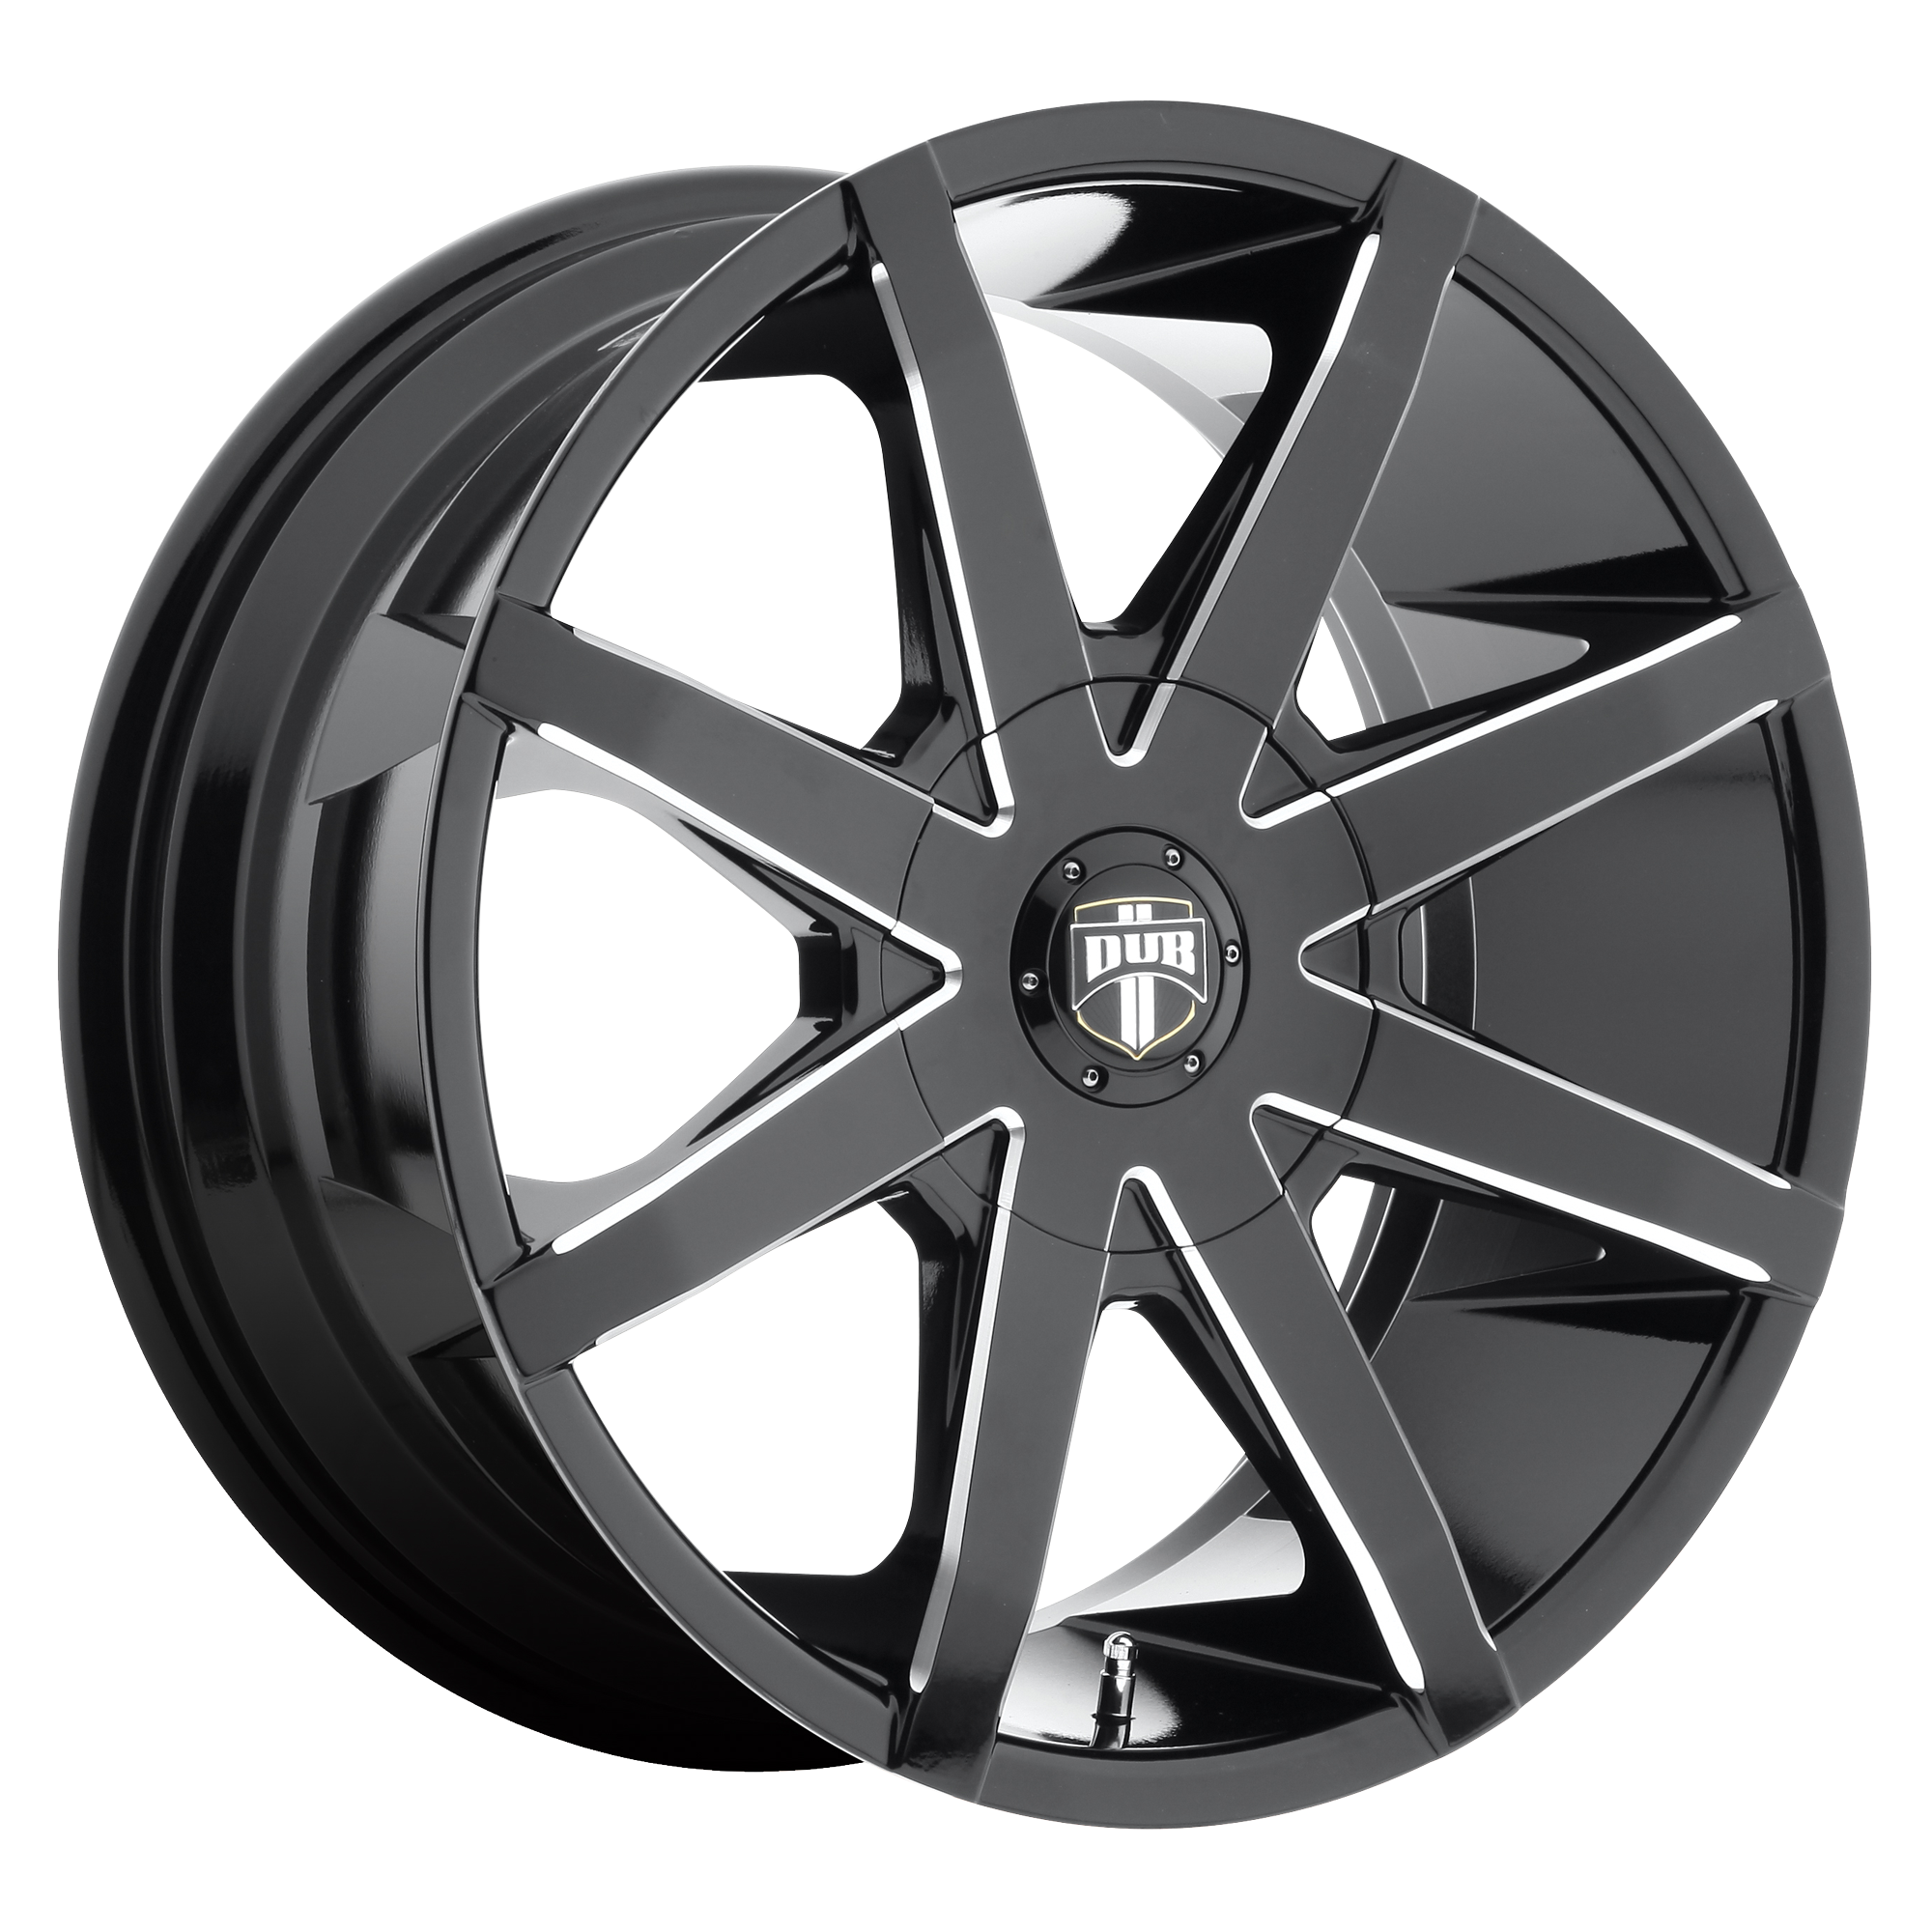 PUSH 22x9.5 5x112.00/5x127.00 GLOSS BLACK MILLED (32 mm) - Tires and Engine Performance